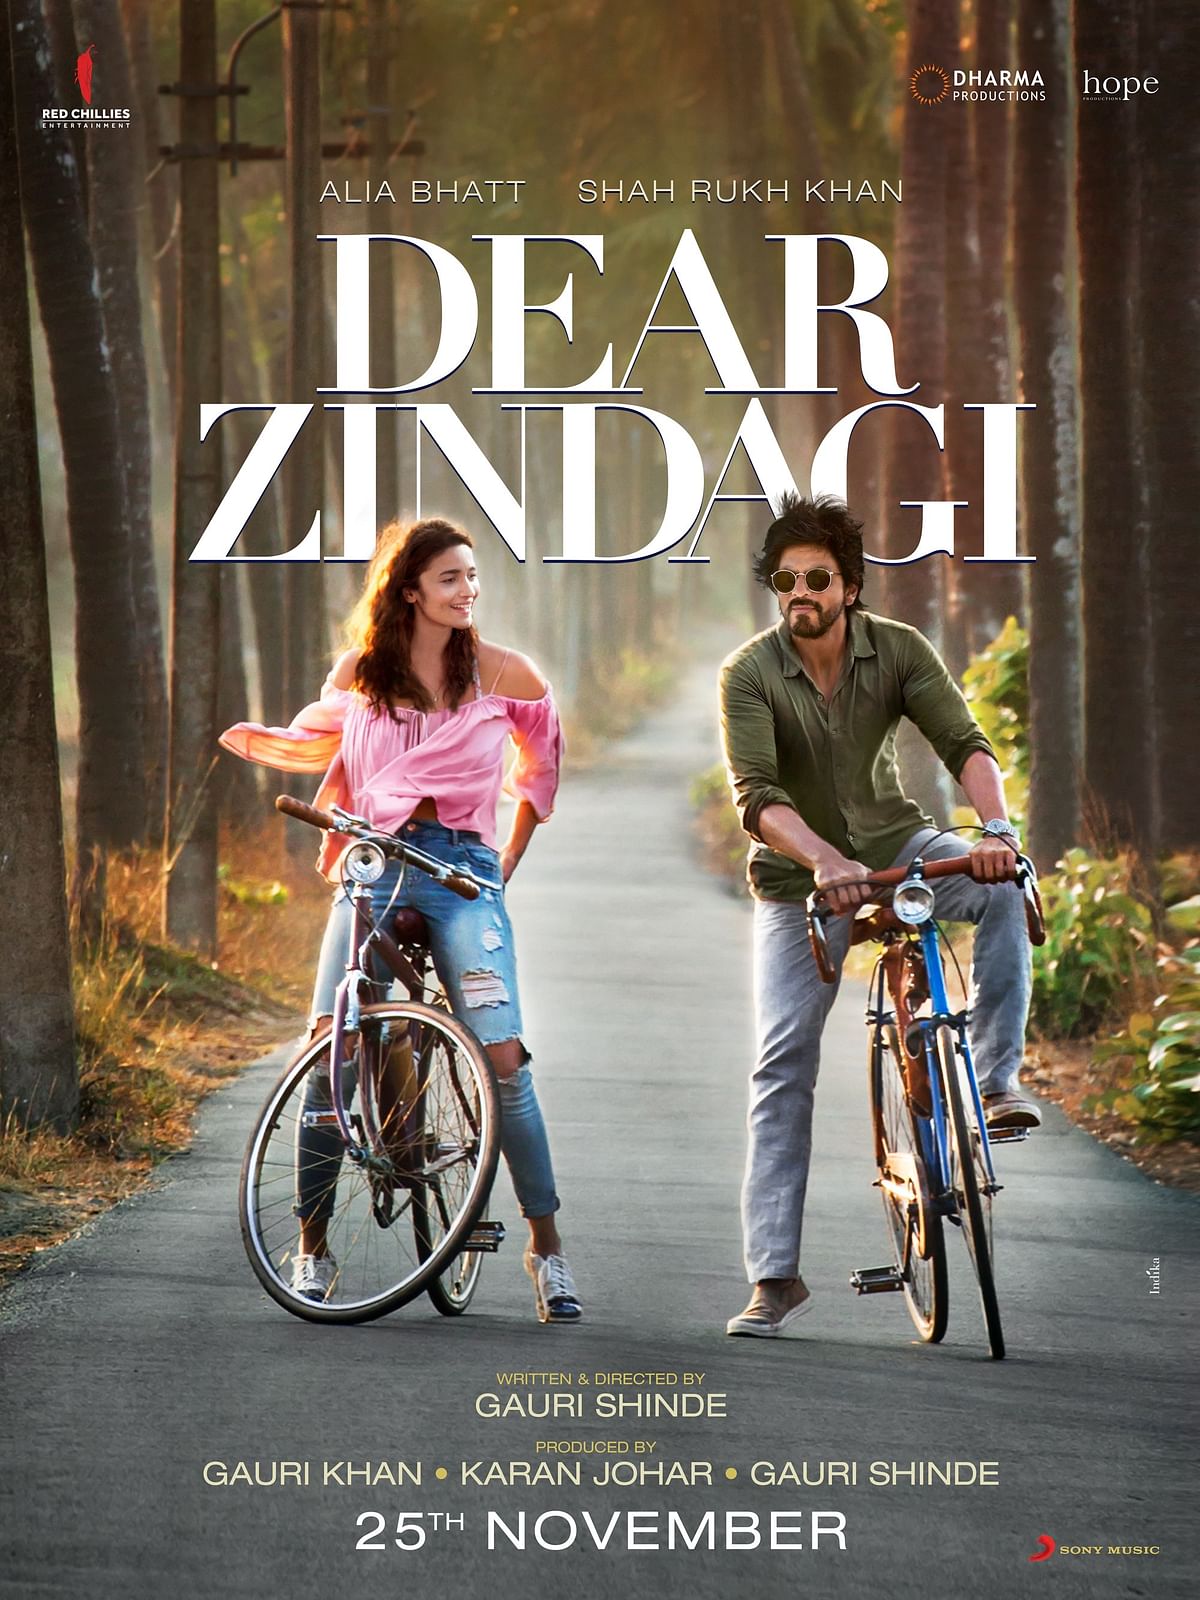 Check out Alia and SRK in the first look of ‘Dear Zindagi’.